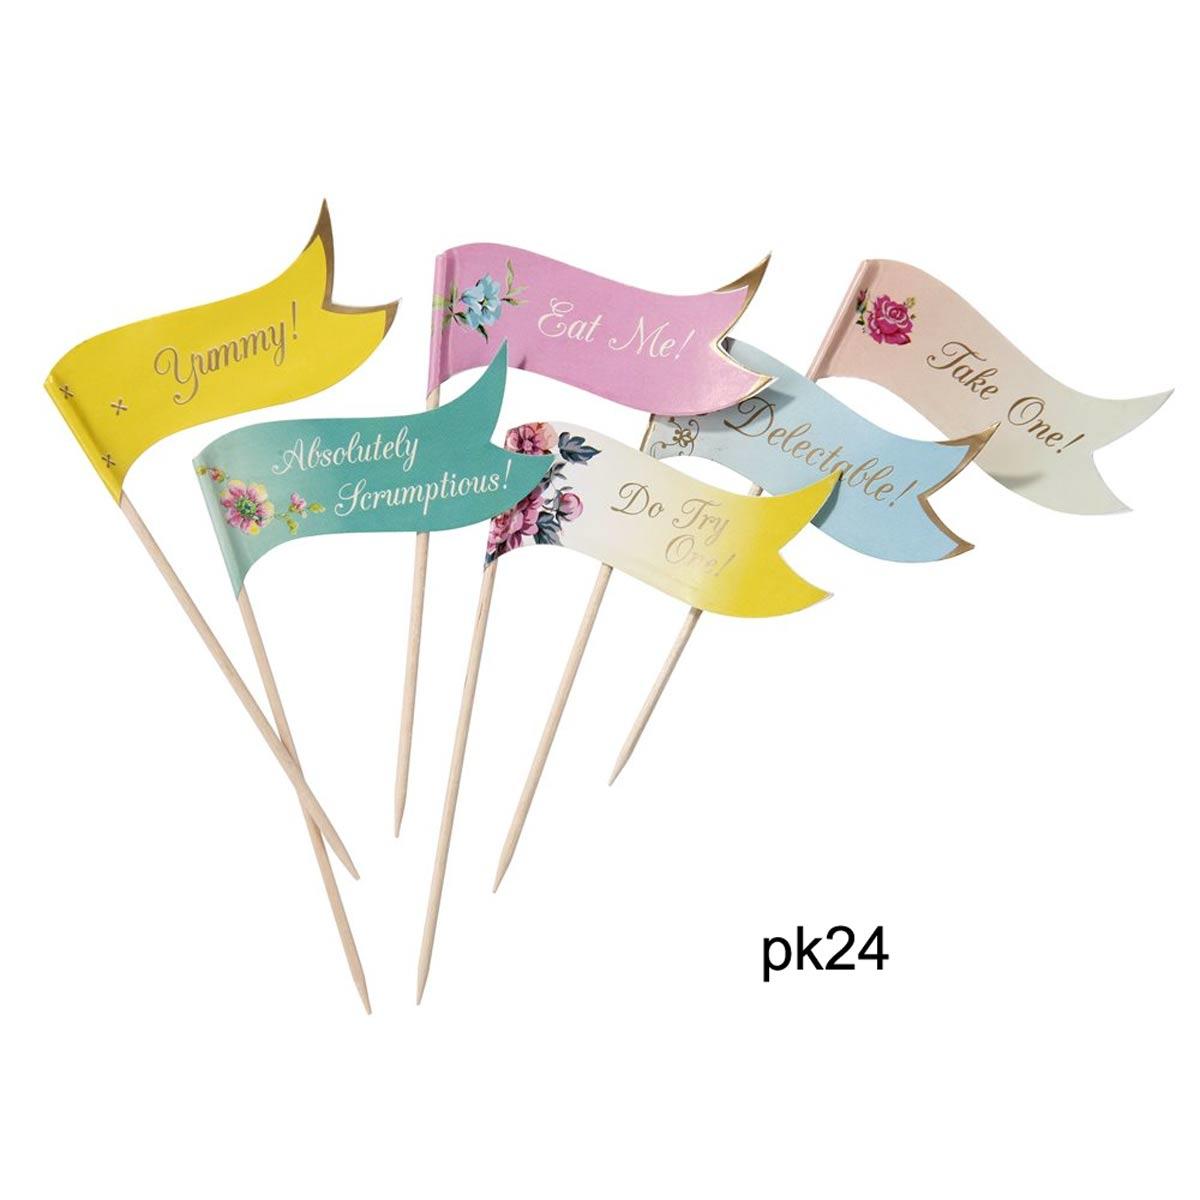 Pk 24 Truly Scrumptious Flag Picks by Talking Tables TS3-CANAPE available here at Karnival Costumes online party shop